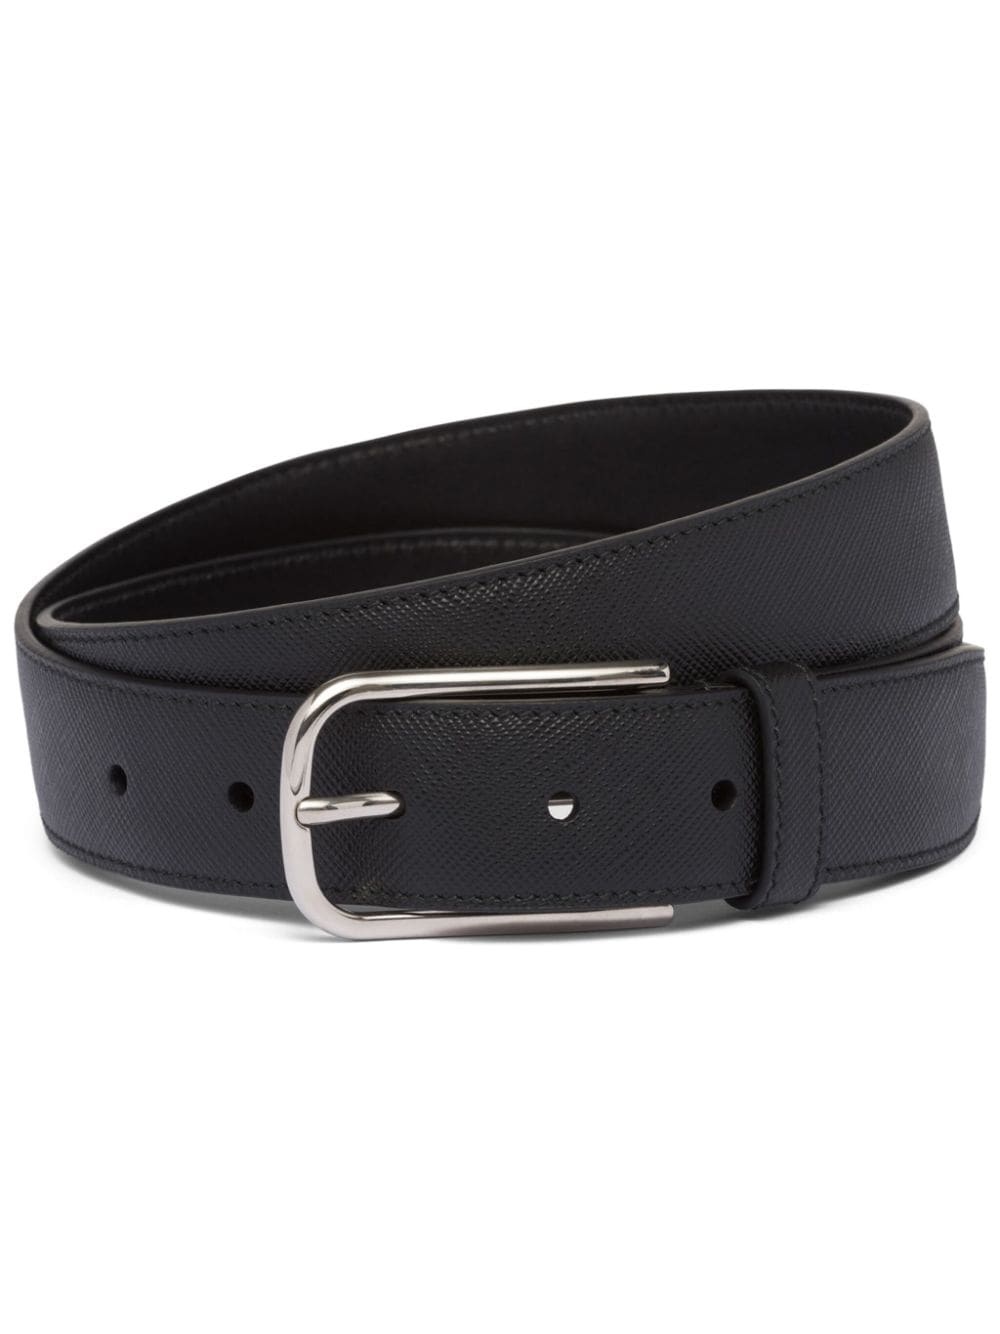 front-buckle leather belt - 1